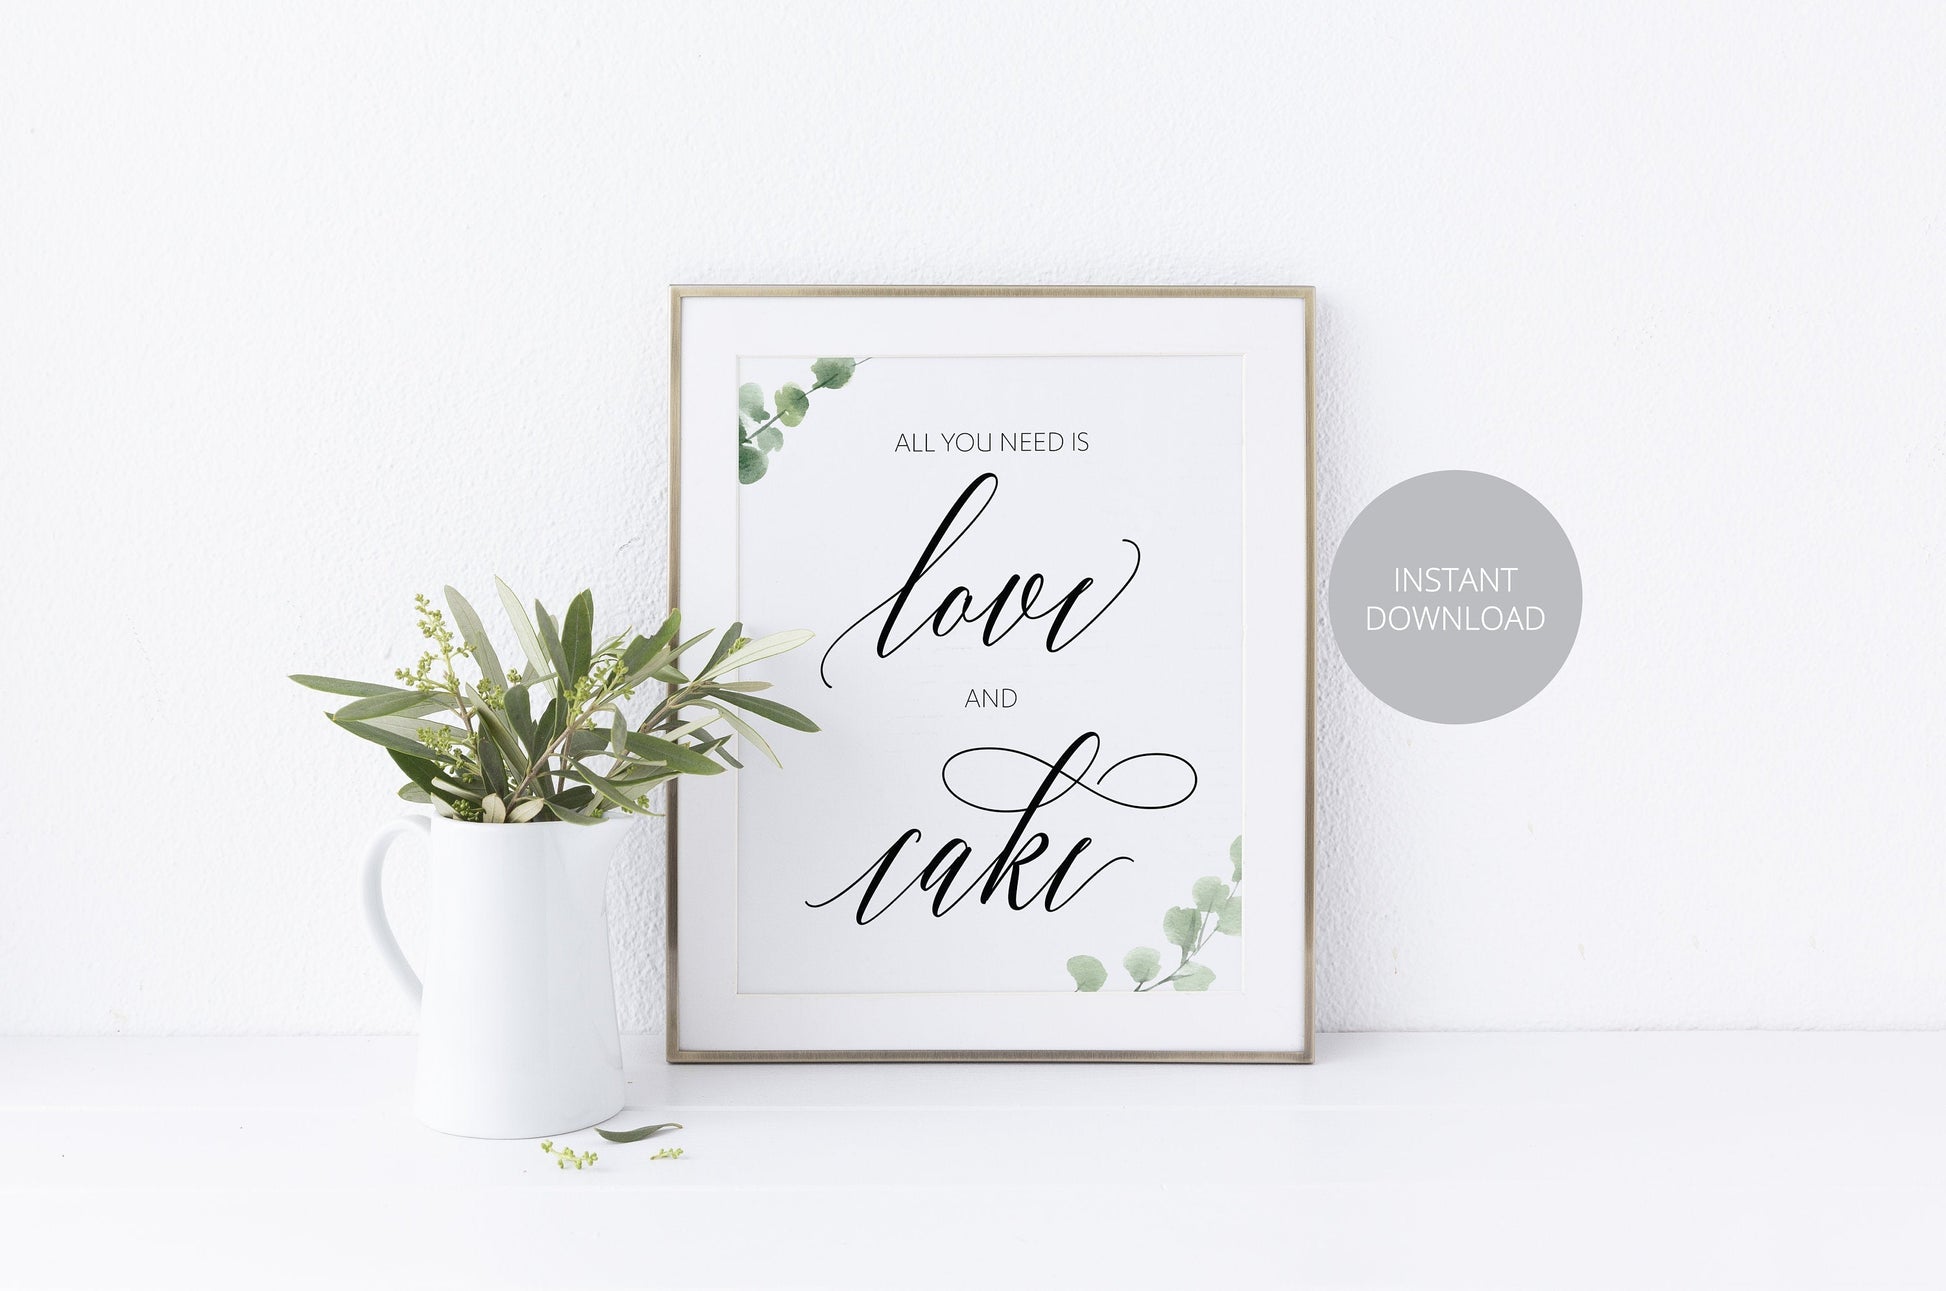 Love and Cake Sign, Cake Table Sign, Reception Decor, Wedding Sign,Greenery Wedding, Wedding Printable, Rustic Wedding, Instant Download SIGNS | PHOTO BOOTH SAVVY PAPER CO